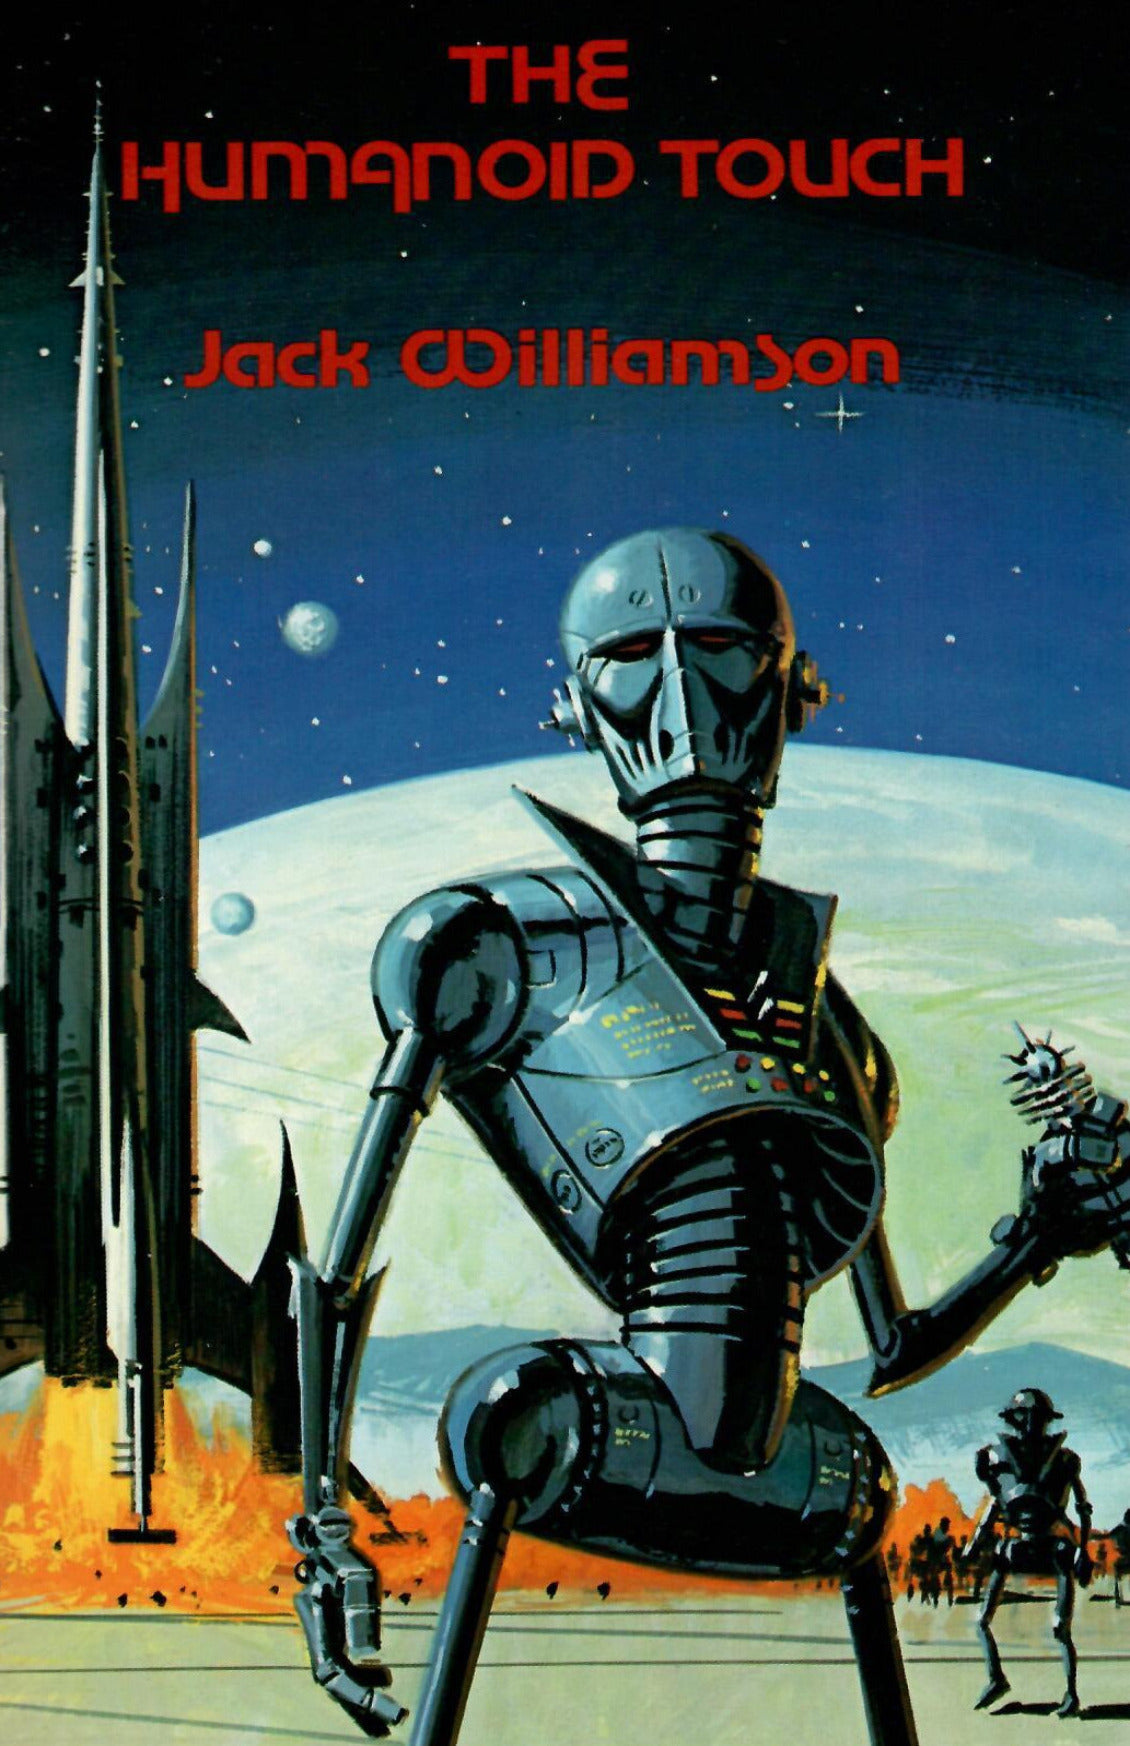 The Humanoid Touch by Jack Williamson